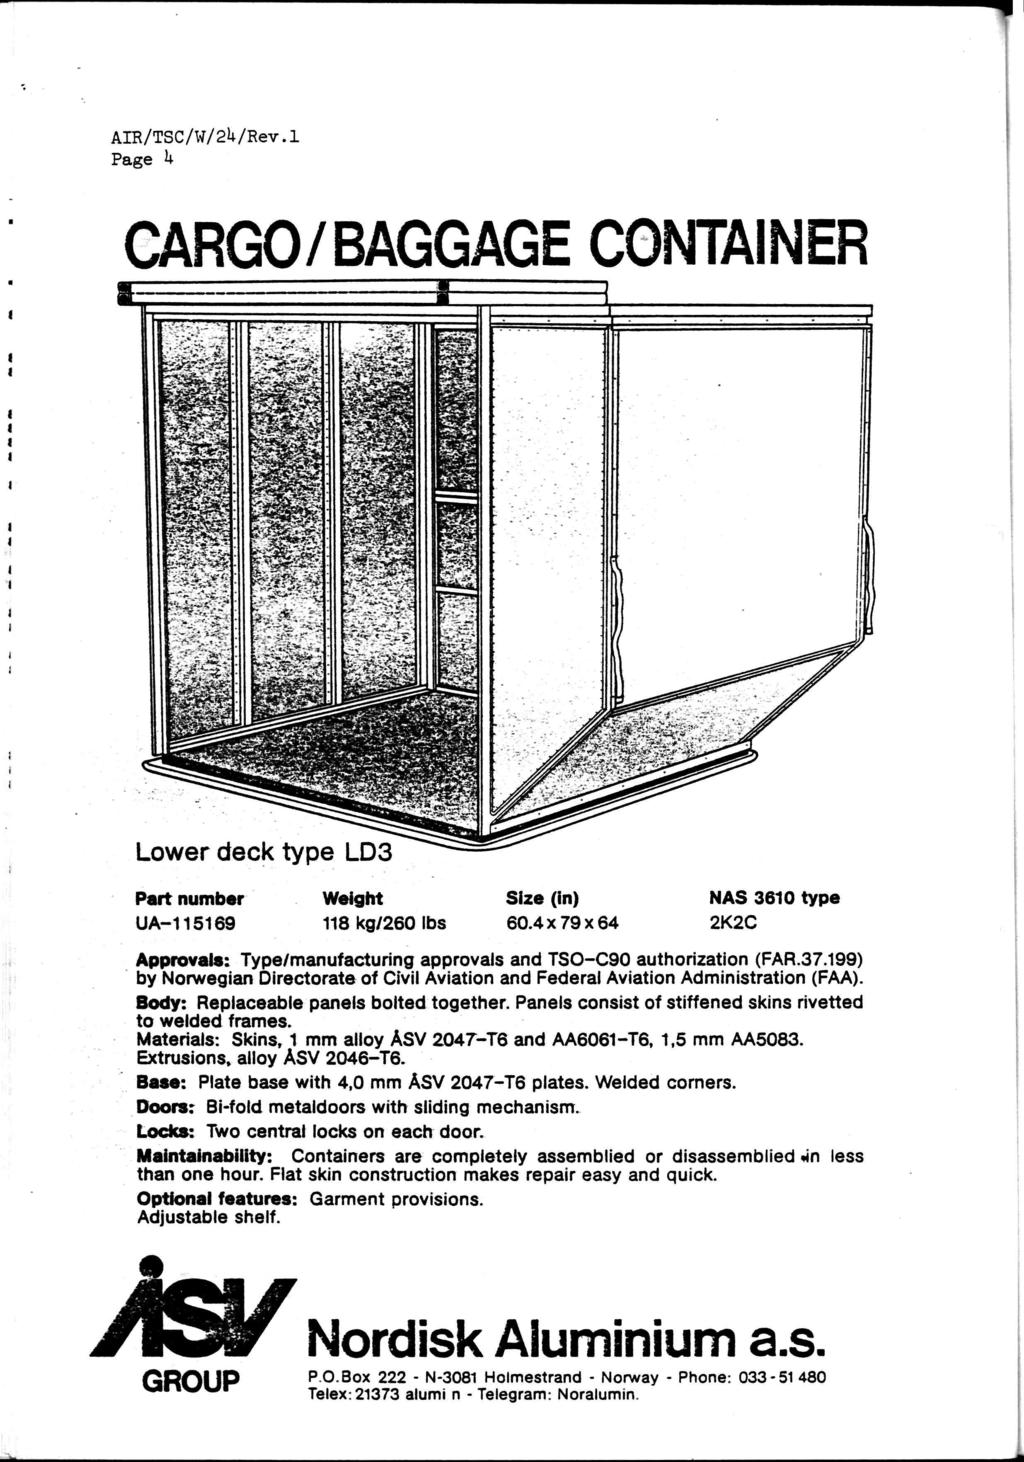 Page U CARGO/BAGGAGE CONTAINER Lower deck type LD3 Part number UA-115169 Weight 118 kg/260 lbs Size (in) 60.